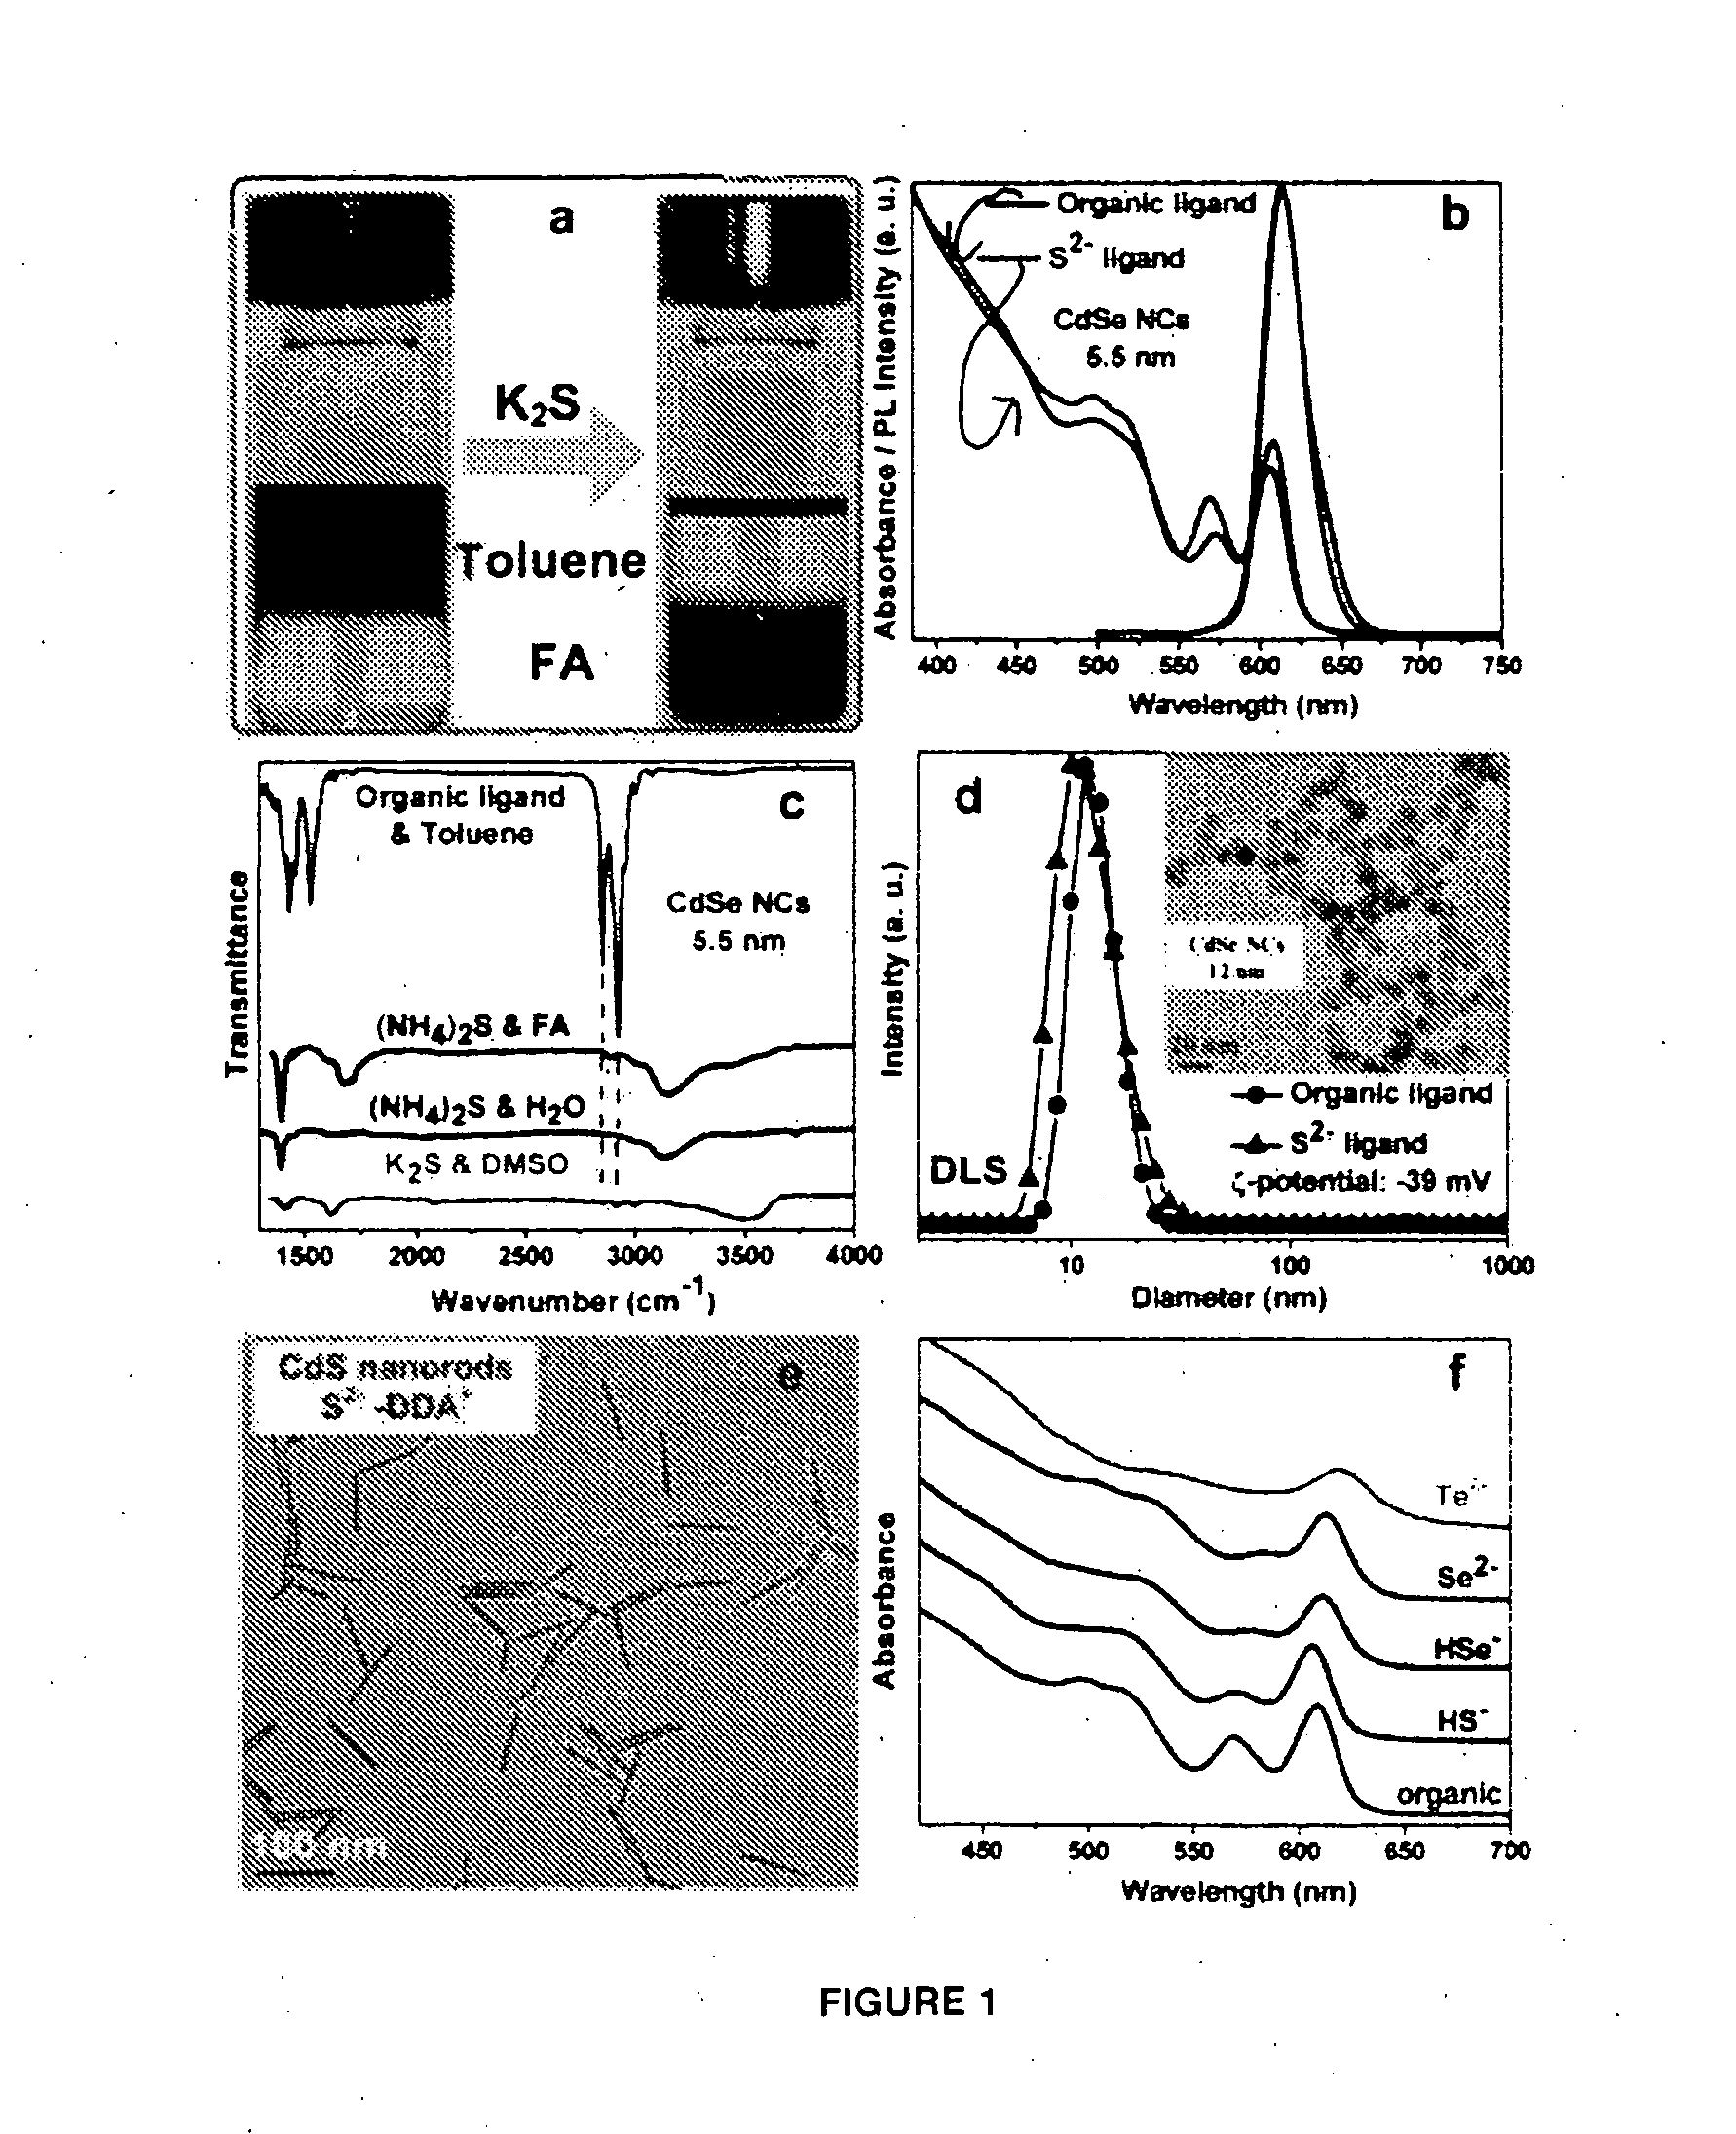 Materials and methods for the preparation of nanocomposites